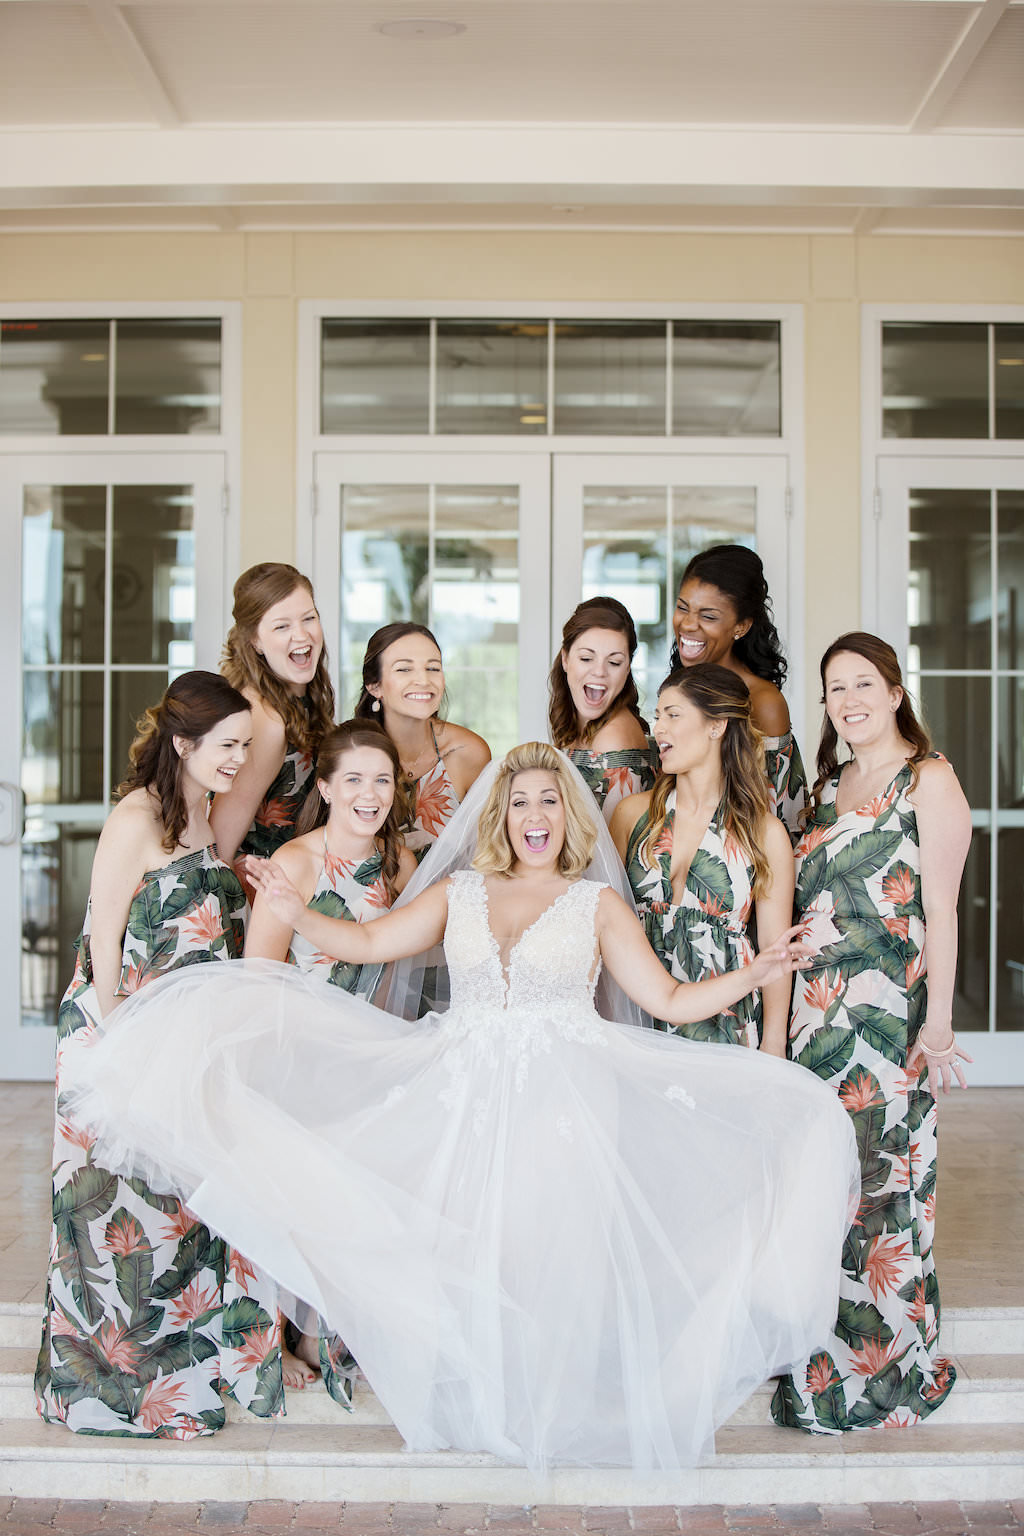 Florida Bride and Bridesmaids Wedding Portrait, Bridesmaids in Tropical Floral Long Matching Dresses, Bride in V Neckline Lace Tank Top Strap Wedding Dress | Tampa Bay Bridal Boutique Truly Forever Bridal